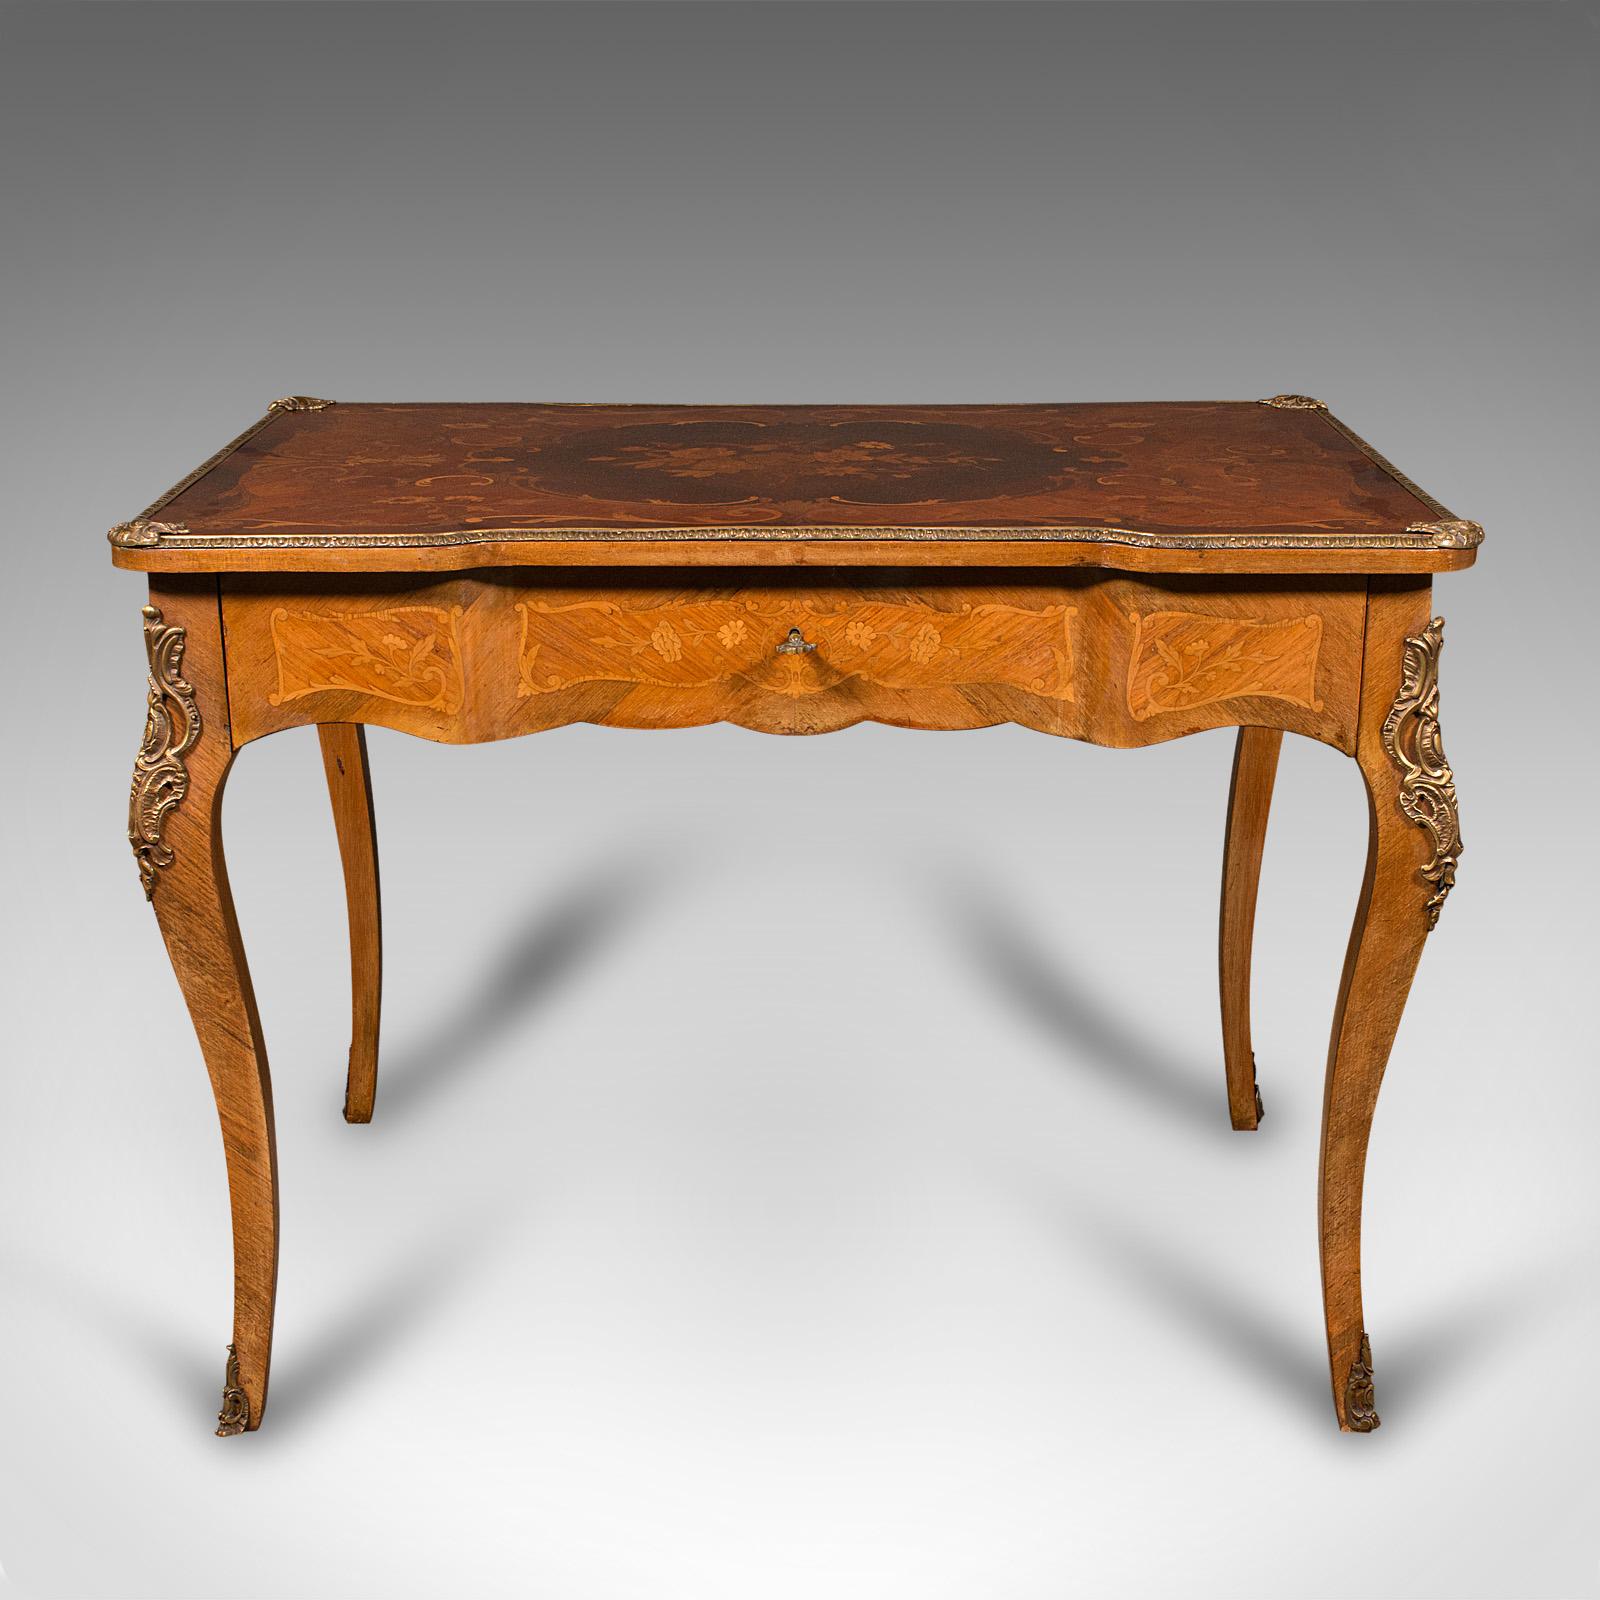 This is an antique writing desk. A French, kingwood reverse breakfront decorative centre table in Louis XV revival taste with marquetry top, dating to the late Victorian period, circa 1900.

Graced with exquisite marquetry and craftsmanship - a